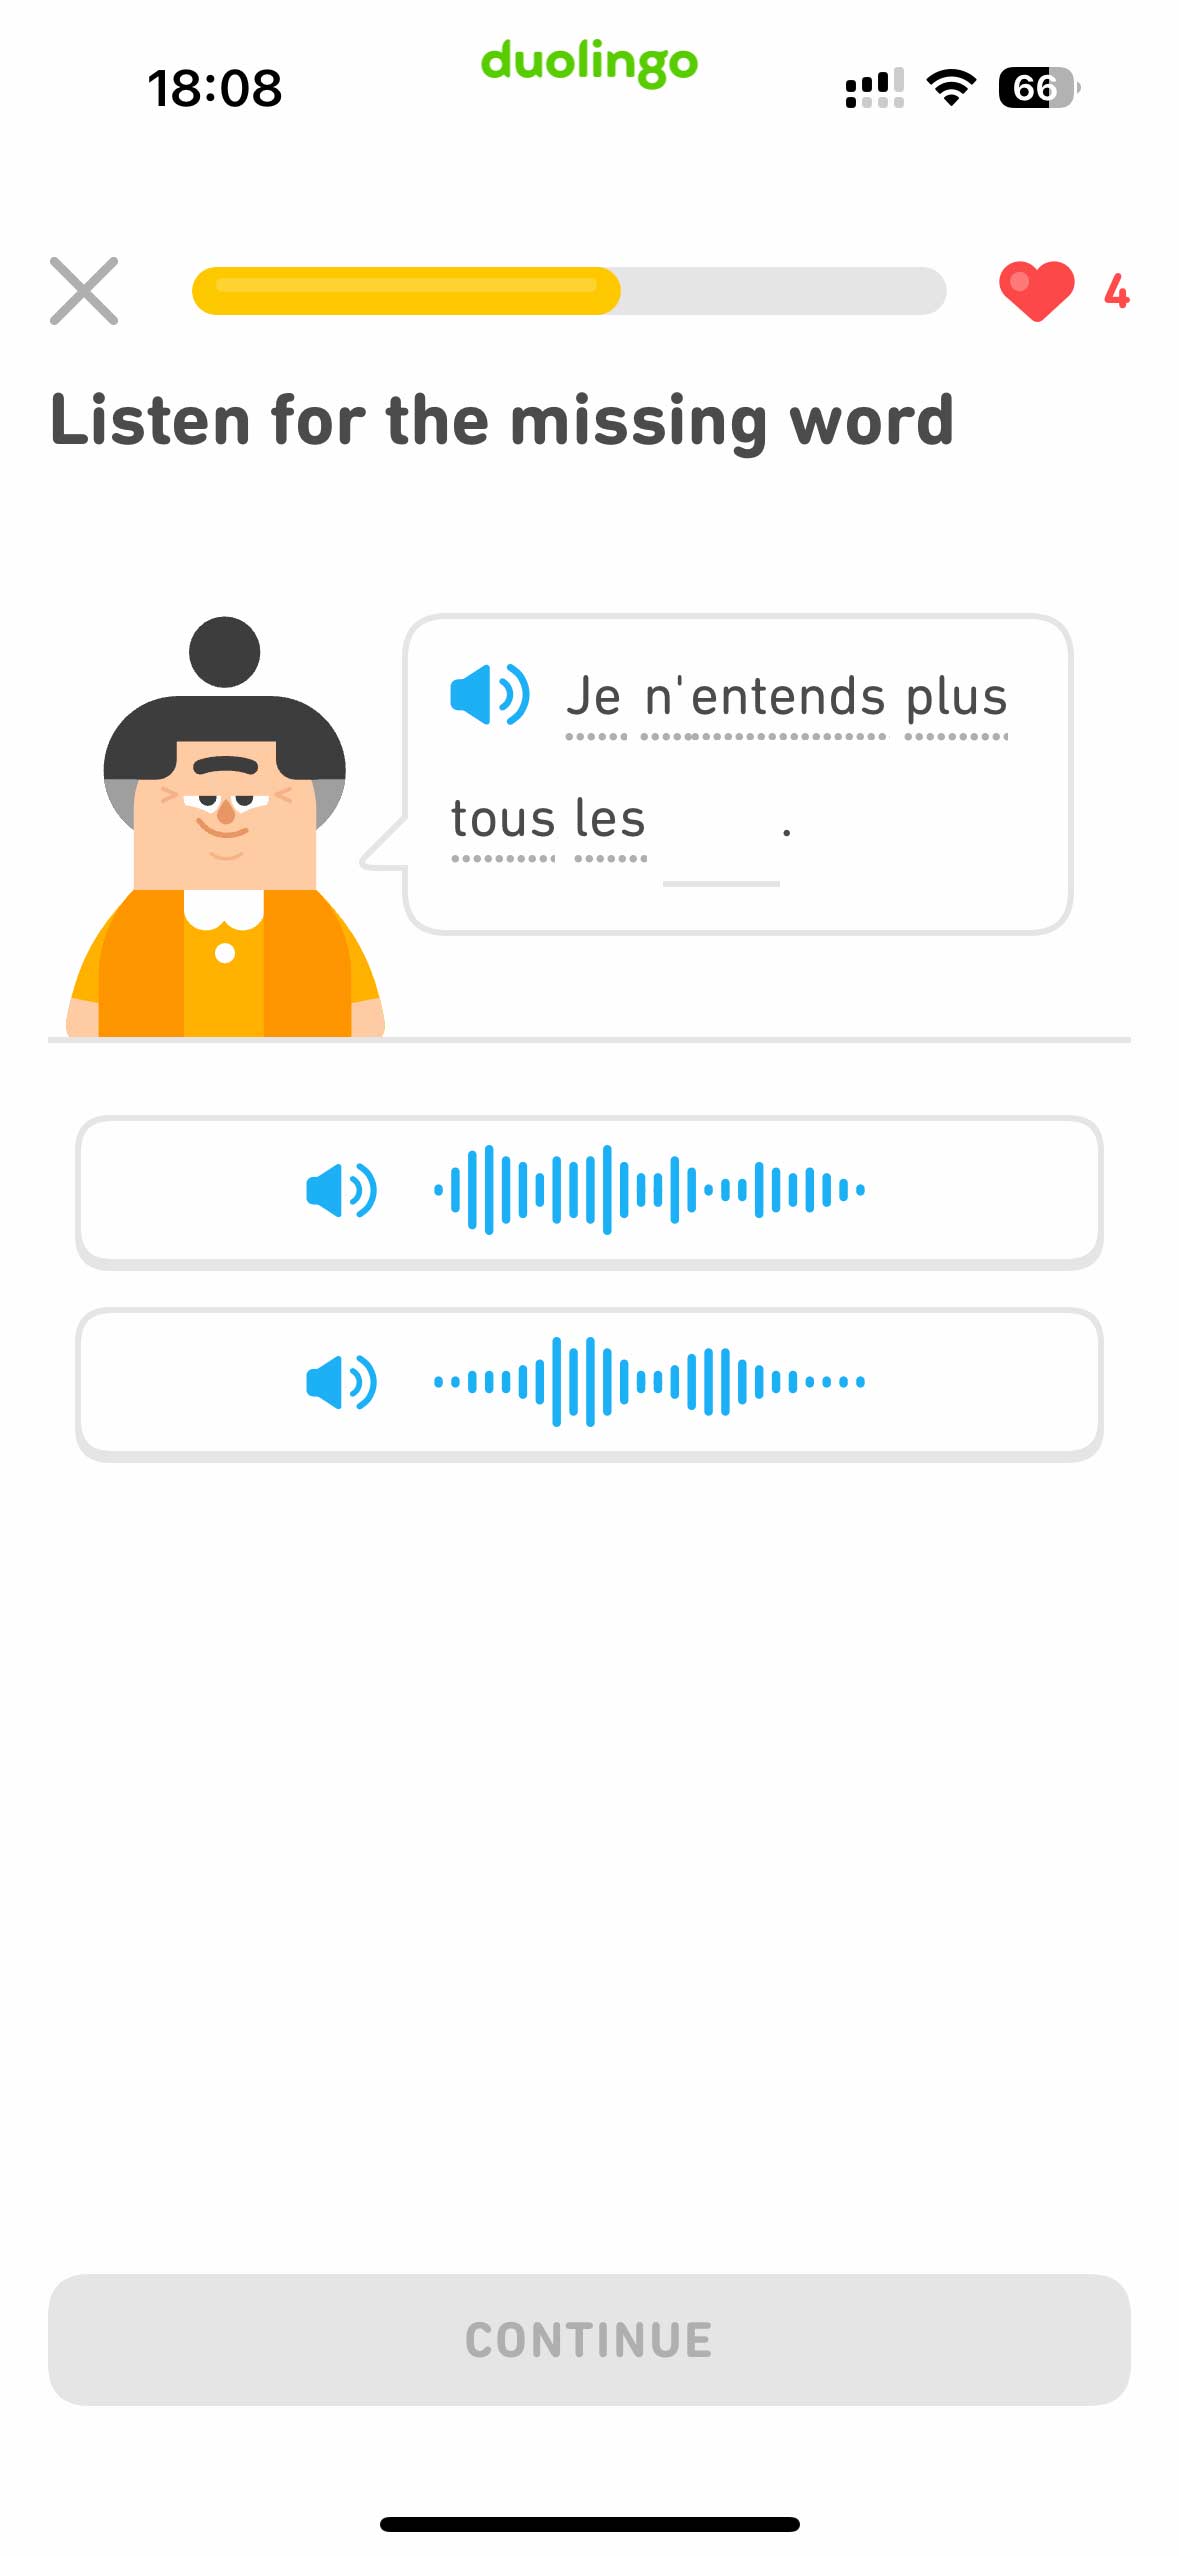 Duolingo listening exercise with a speaker icon, a sentence in the target language, and multiple-choice options for translation